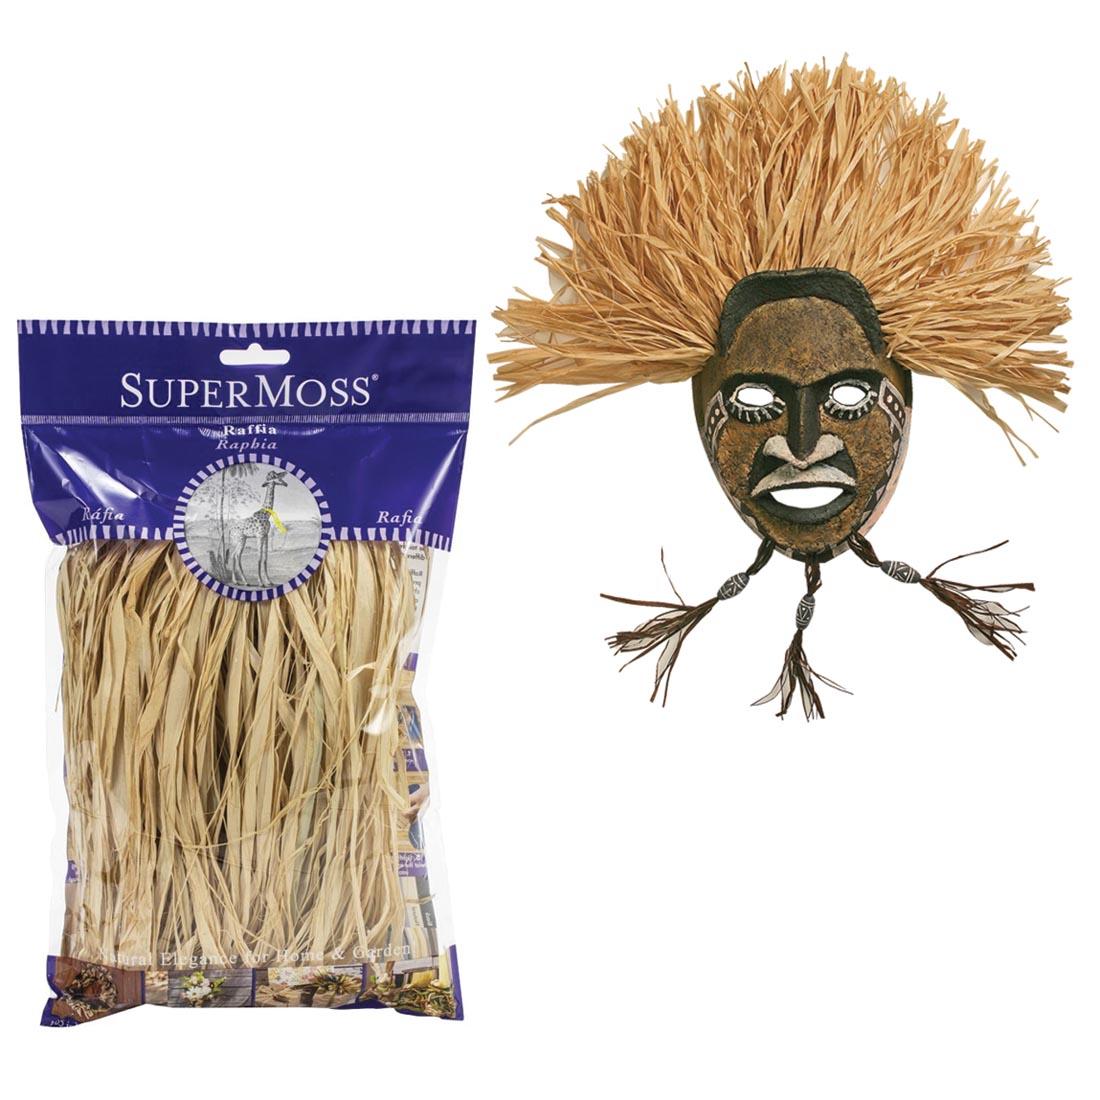 Package of Super Moss Raffia with an African mask made using it